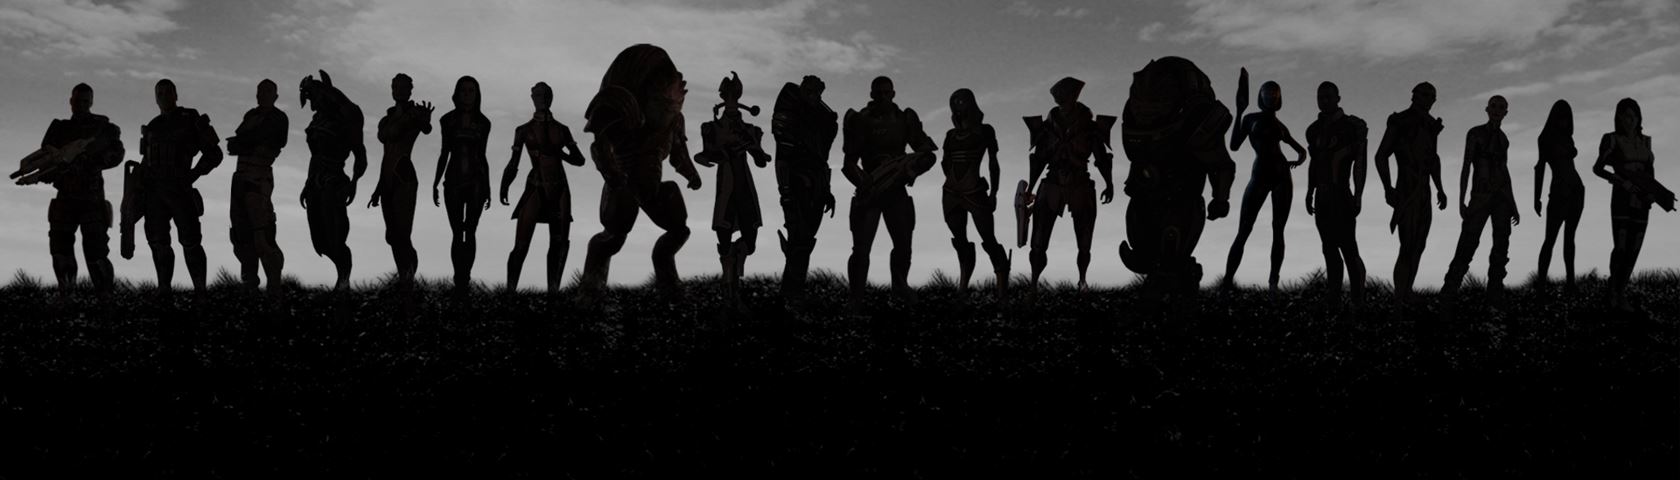 Mass Effect Army: Band of Brothers